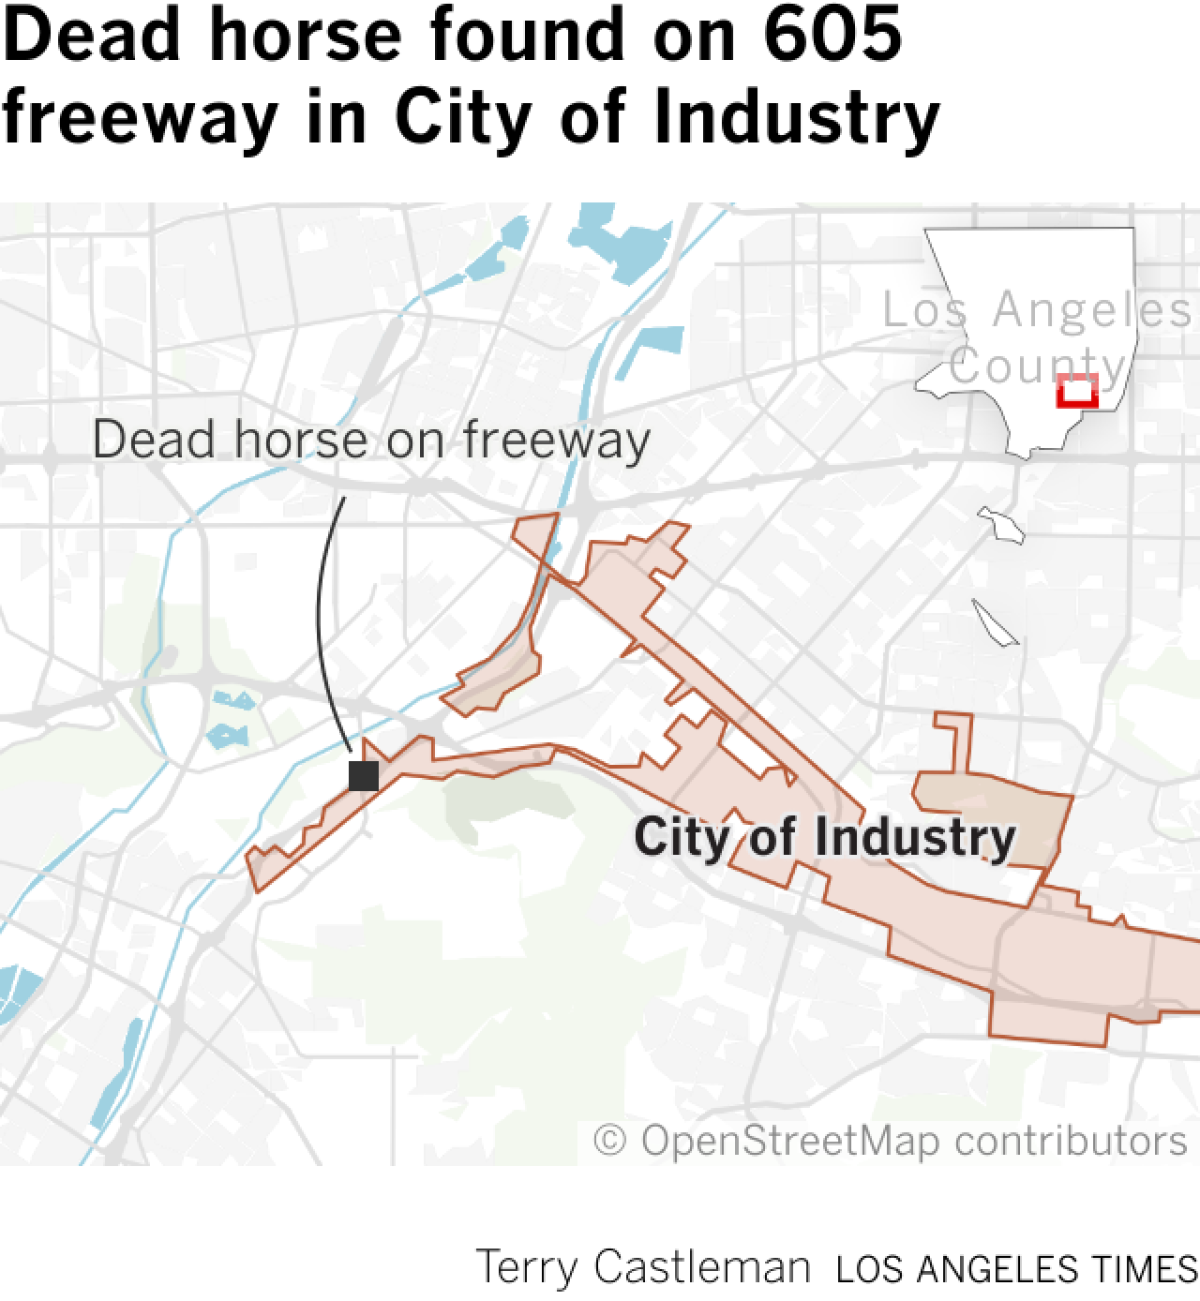 Map showing 605 freeway location where dead horse was found